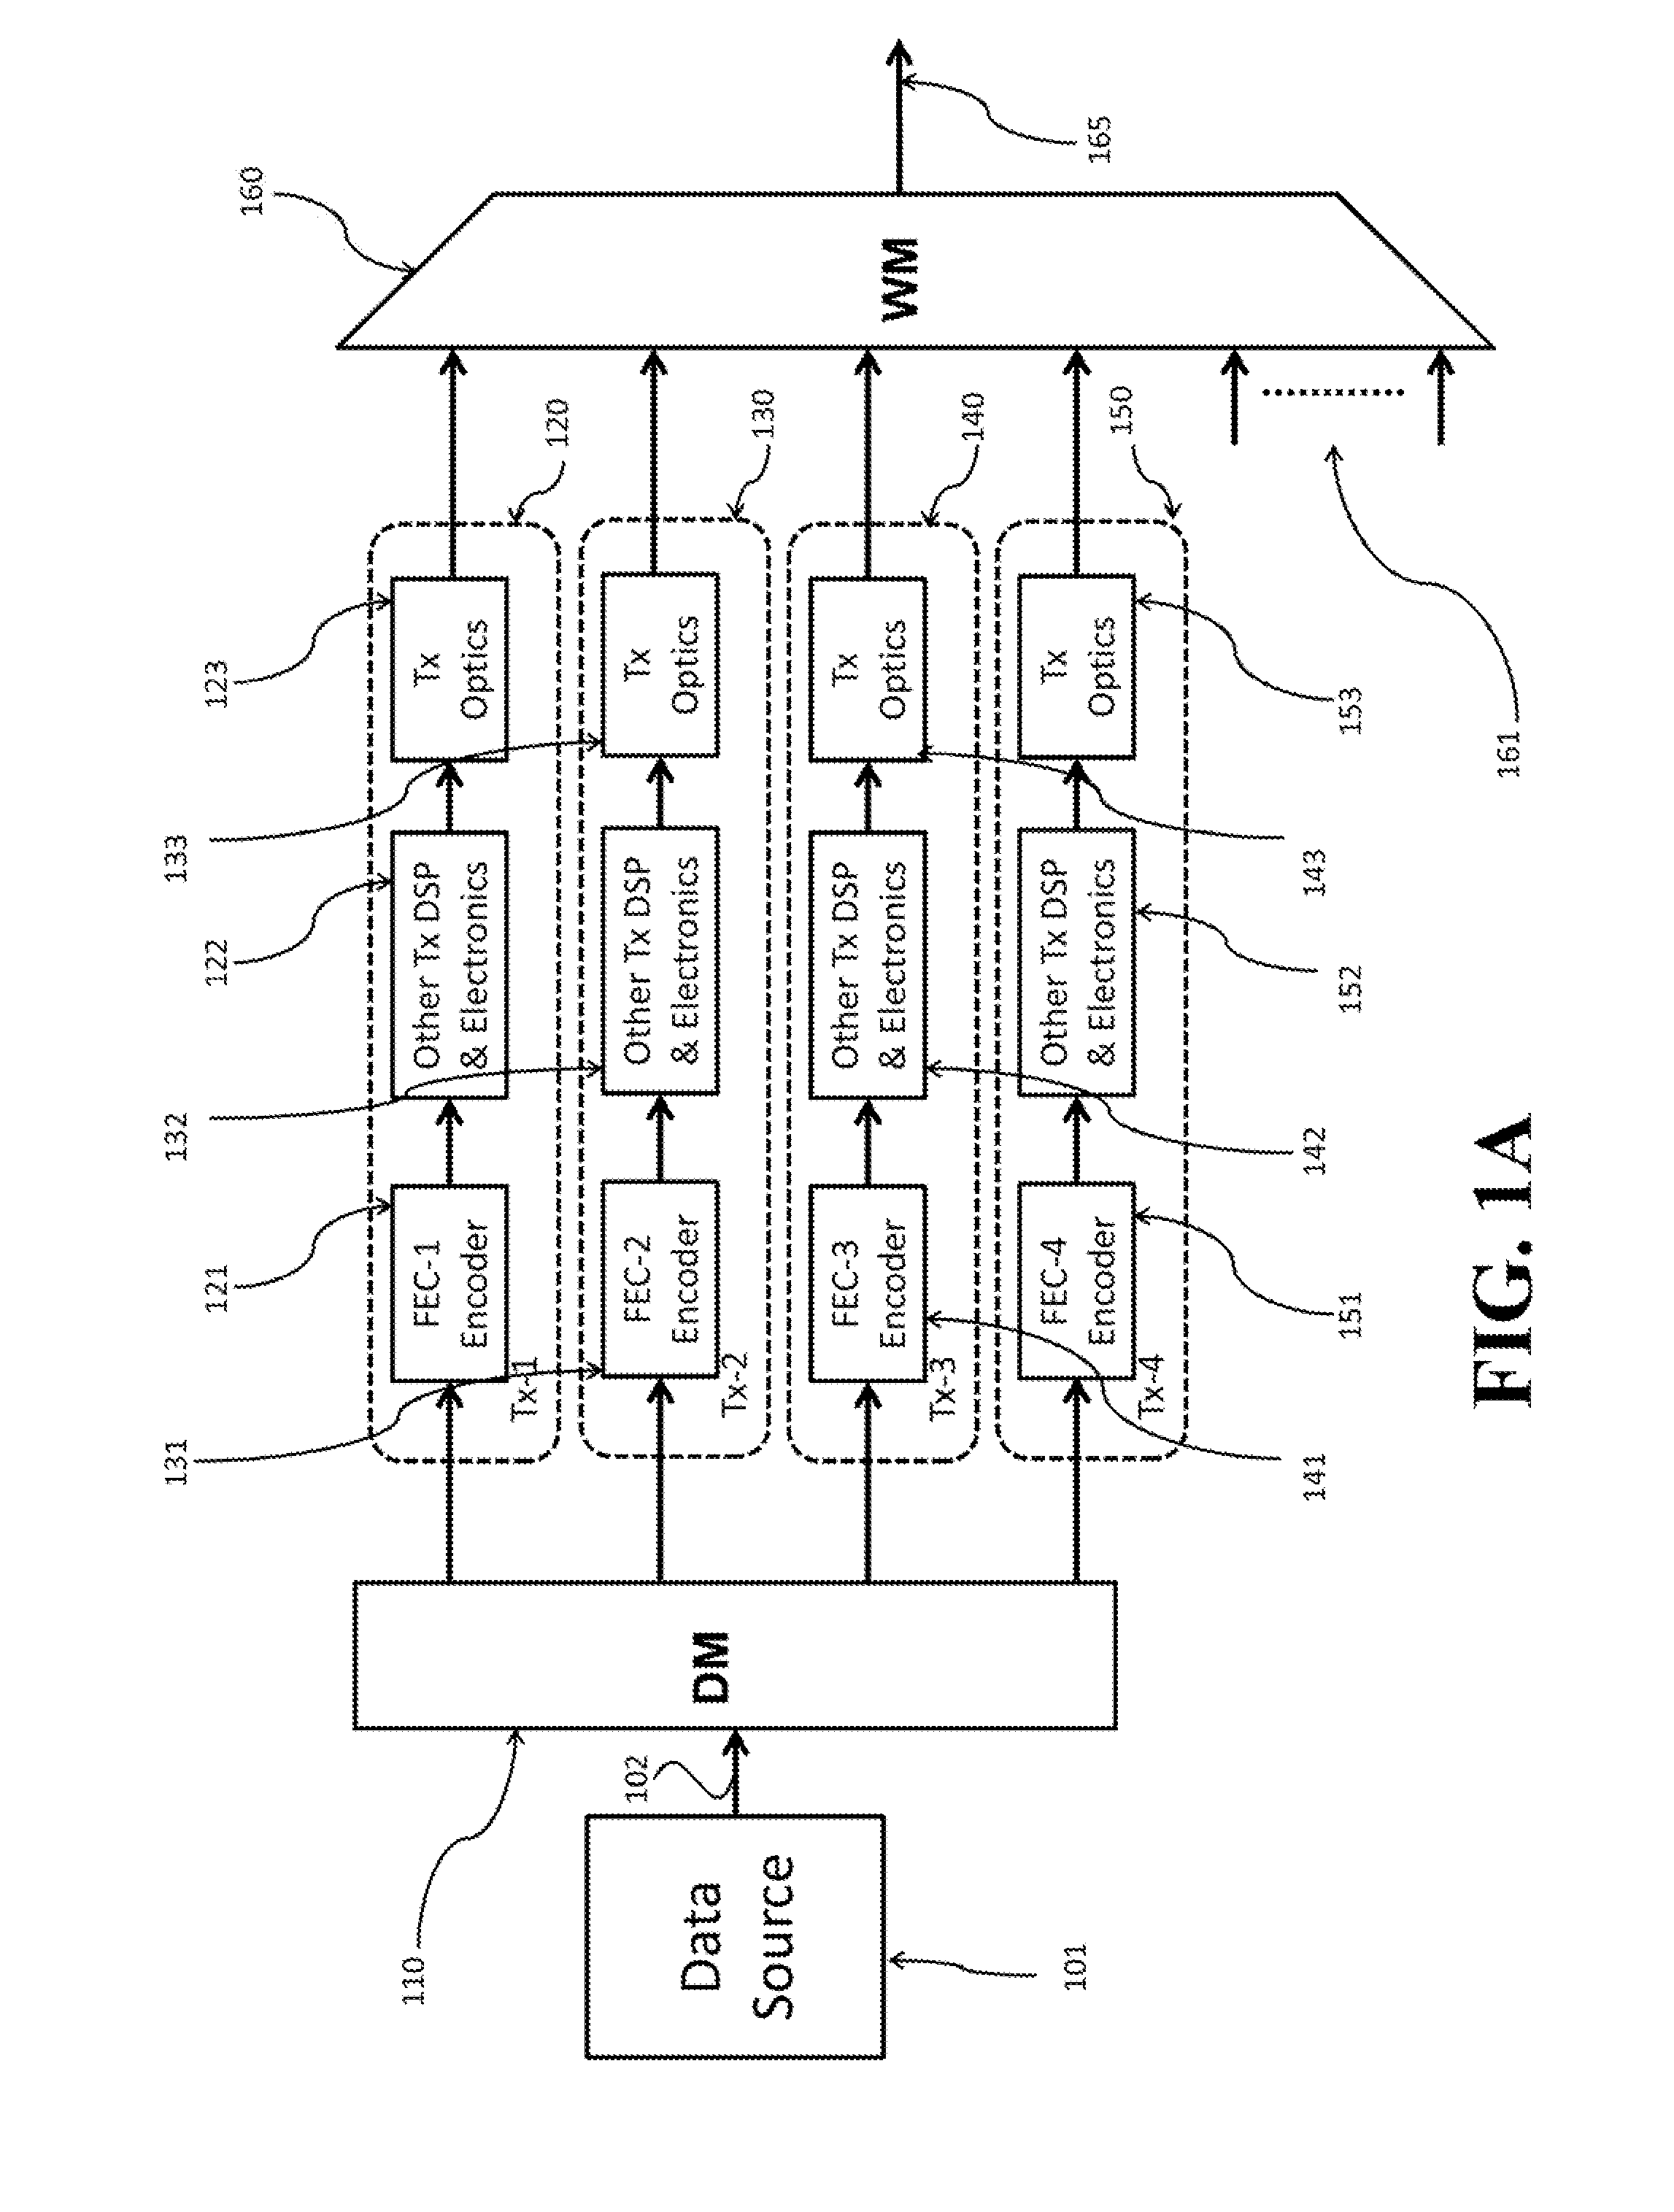 Adaptive Error Correction Code for Optical Super-Channels